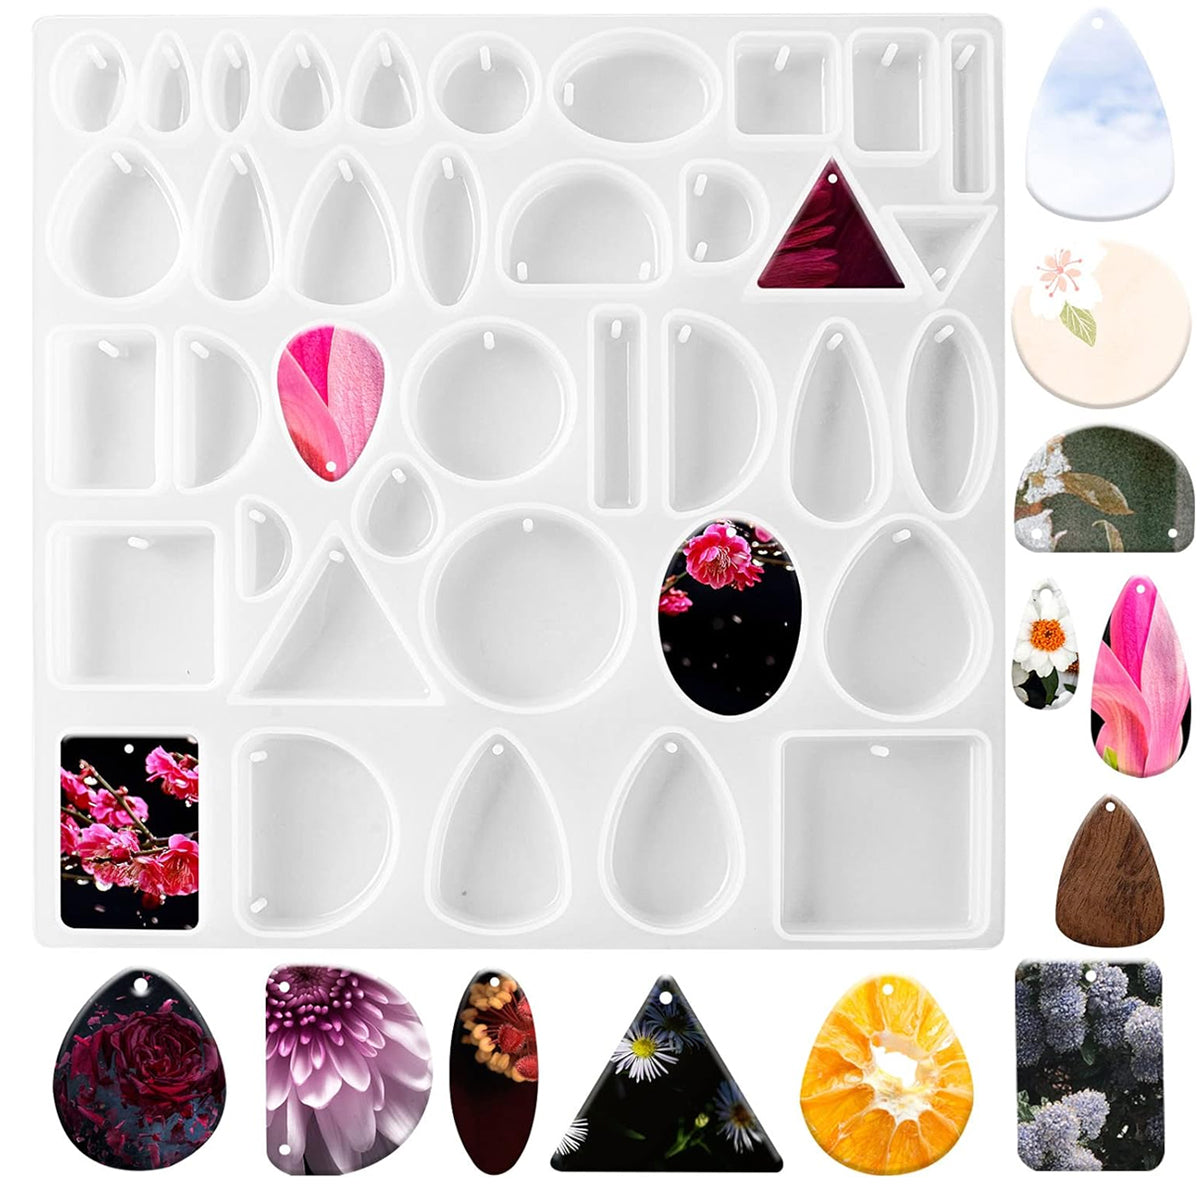 HASTHIP® Resin Mold 38 in 1 Geometric Shape Silicone Mold for Resin Art Pendant Mold DIY Hanging Ornament Reusable Resin Mold for DIY Necklace, Jewelry, Keychain Charms